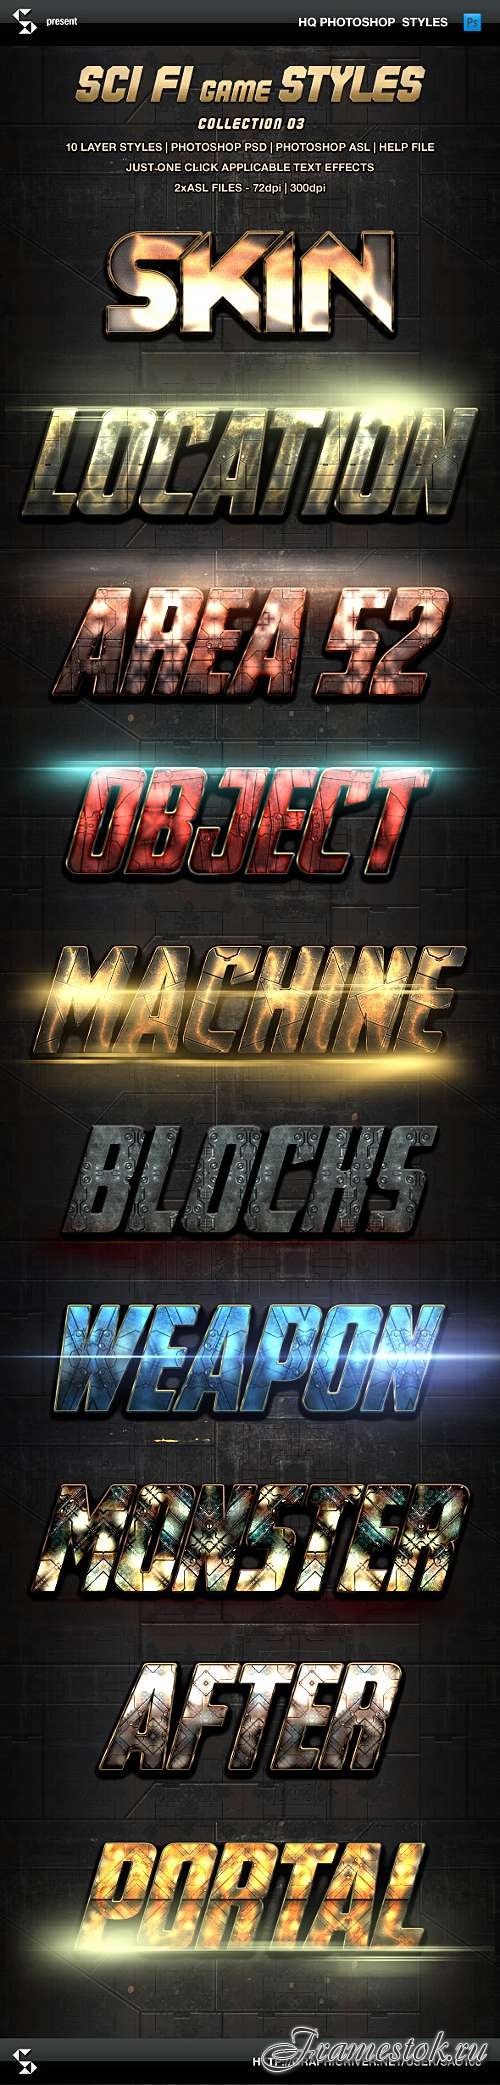 GraphicRiver - Sci-fi Game Styles - Collection 3